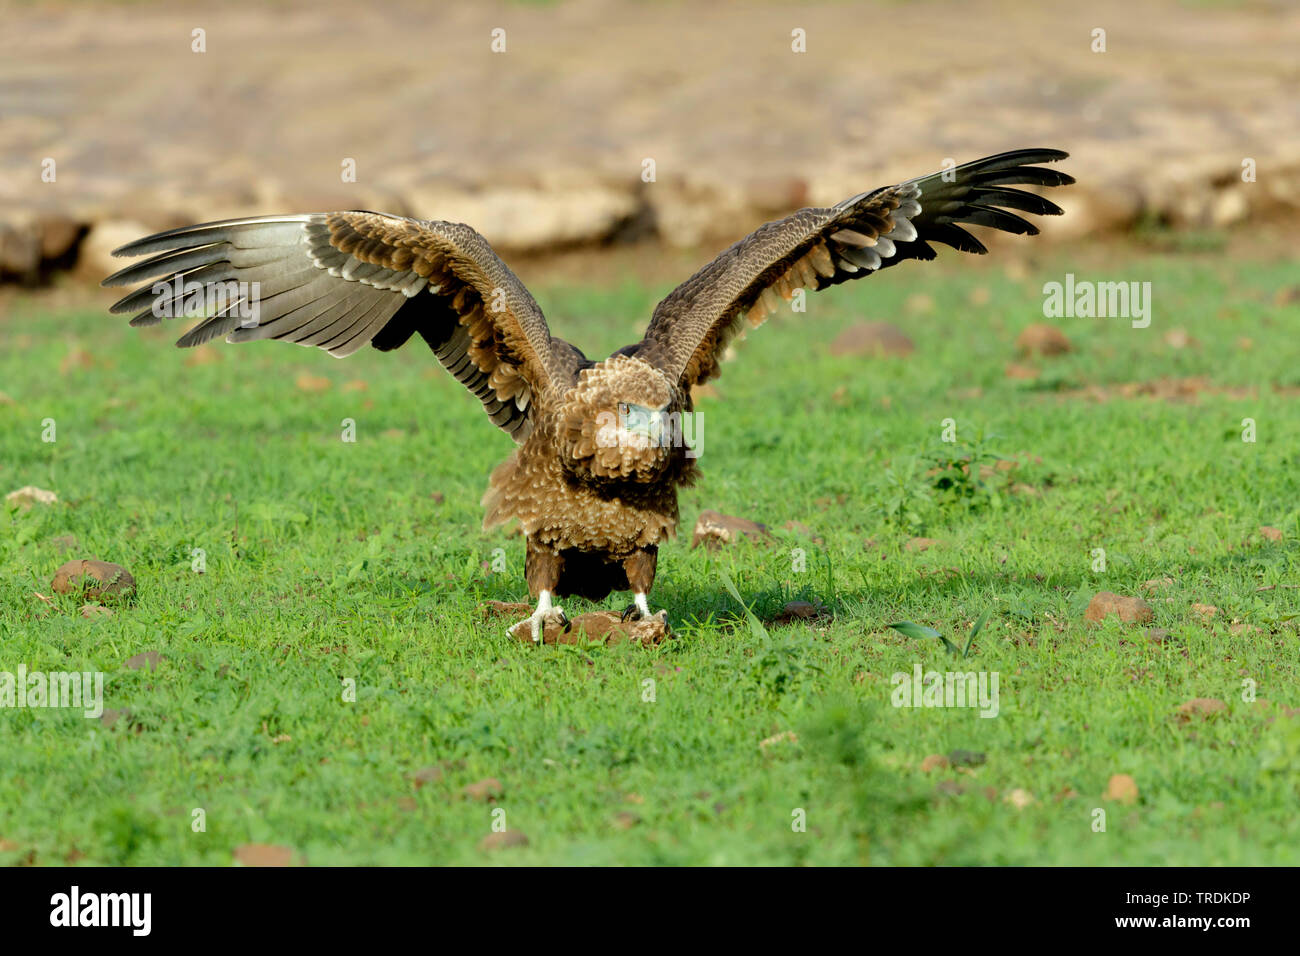 tawny eagle (Aquila rapax), young bird clutching in an hole in the ground, front view, South Africa, Lowveld, Krueger National Park Stock Photo